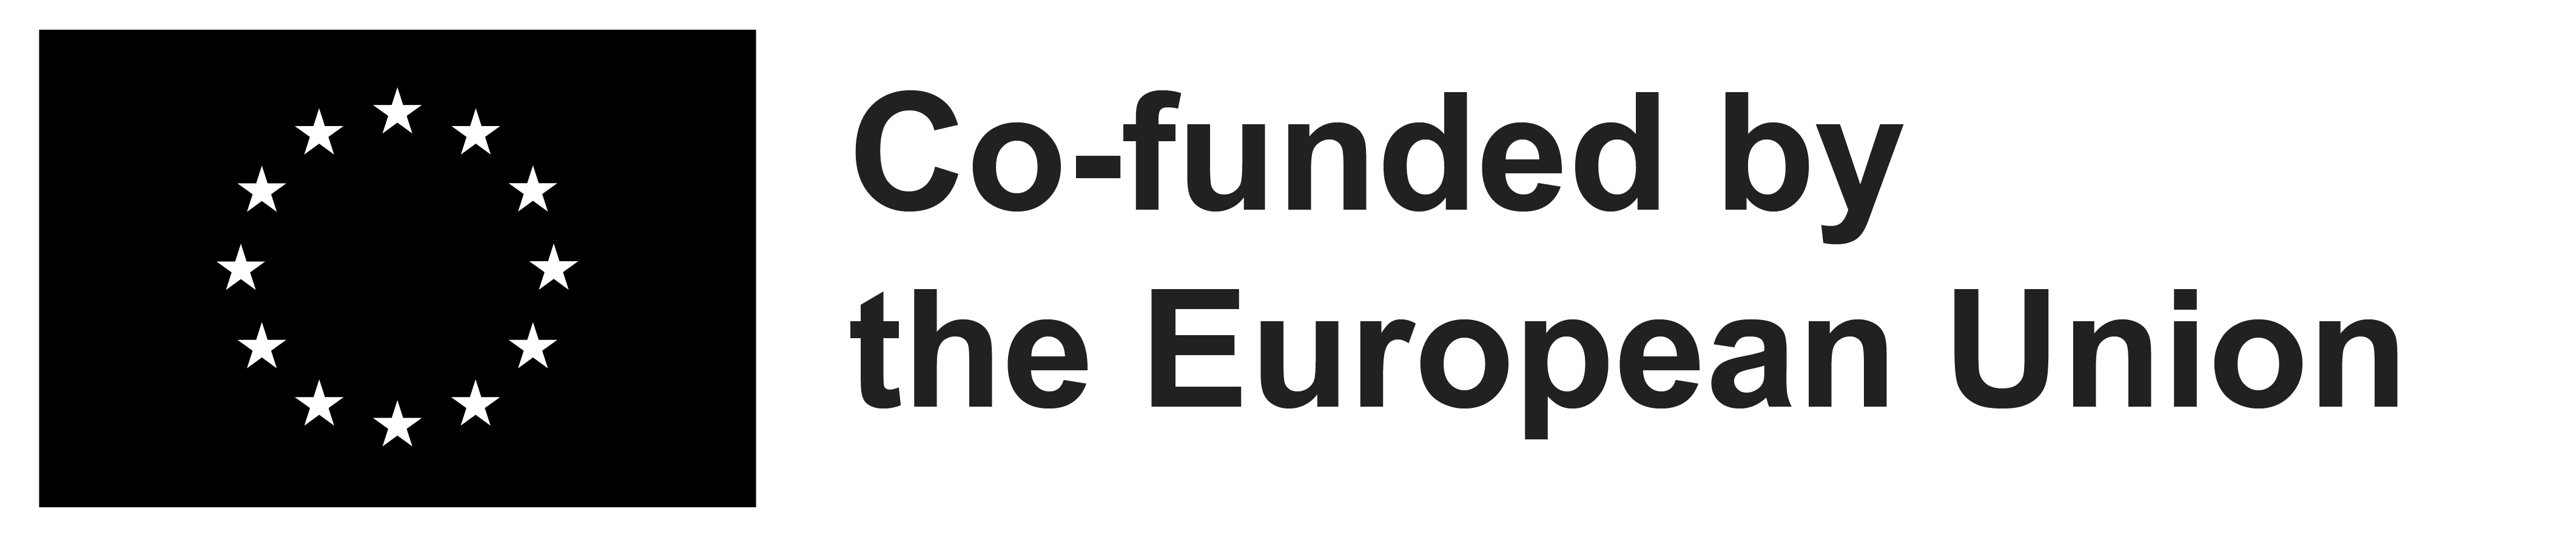 Co- founded by the European Union